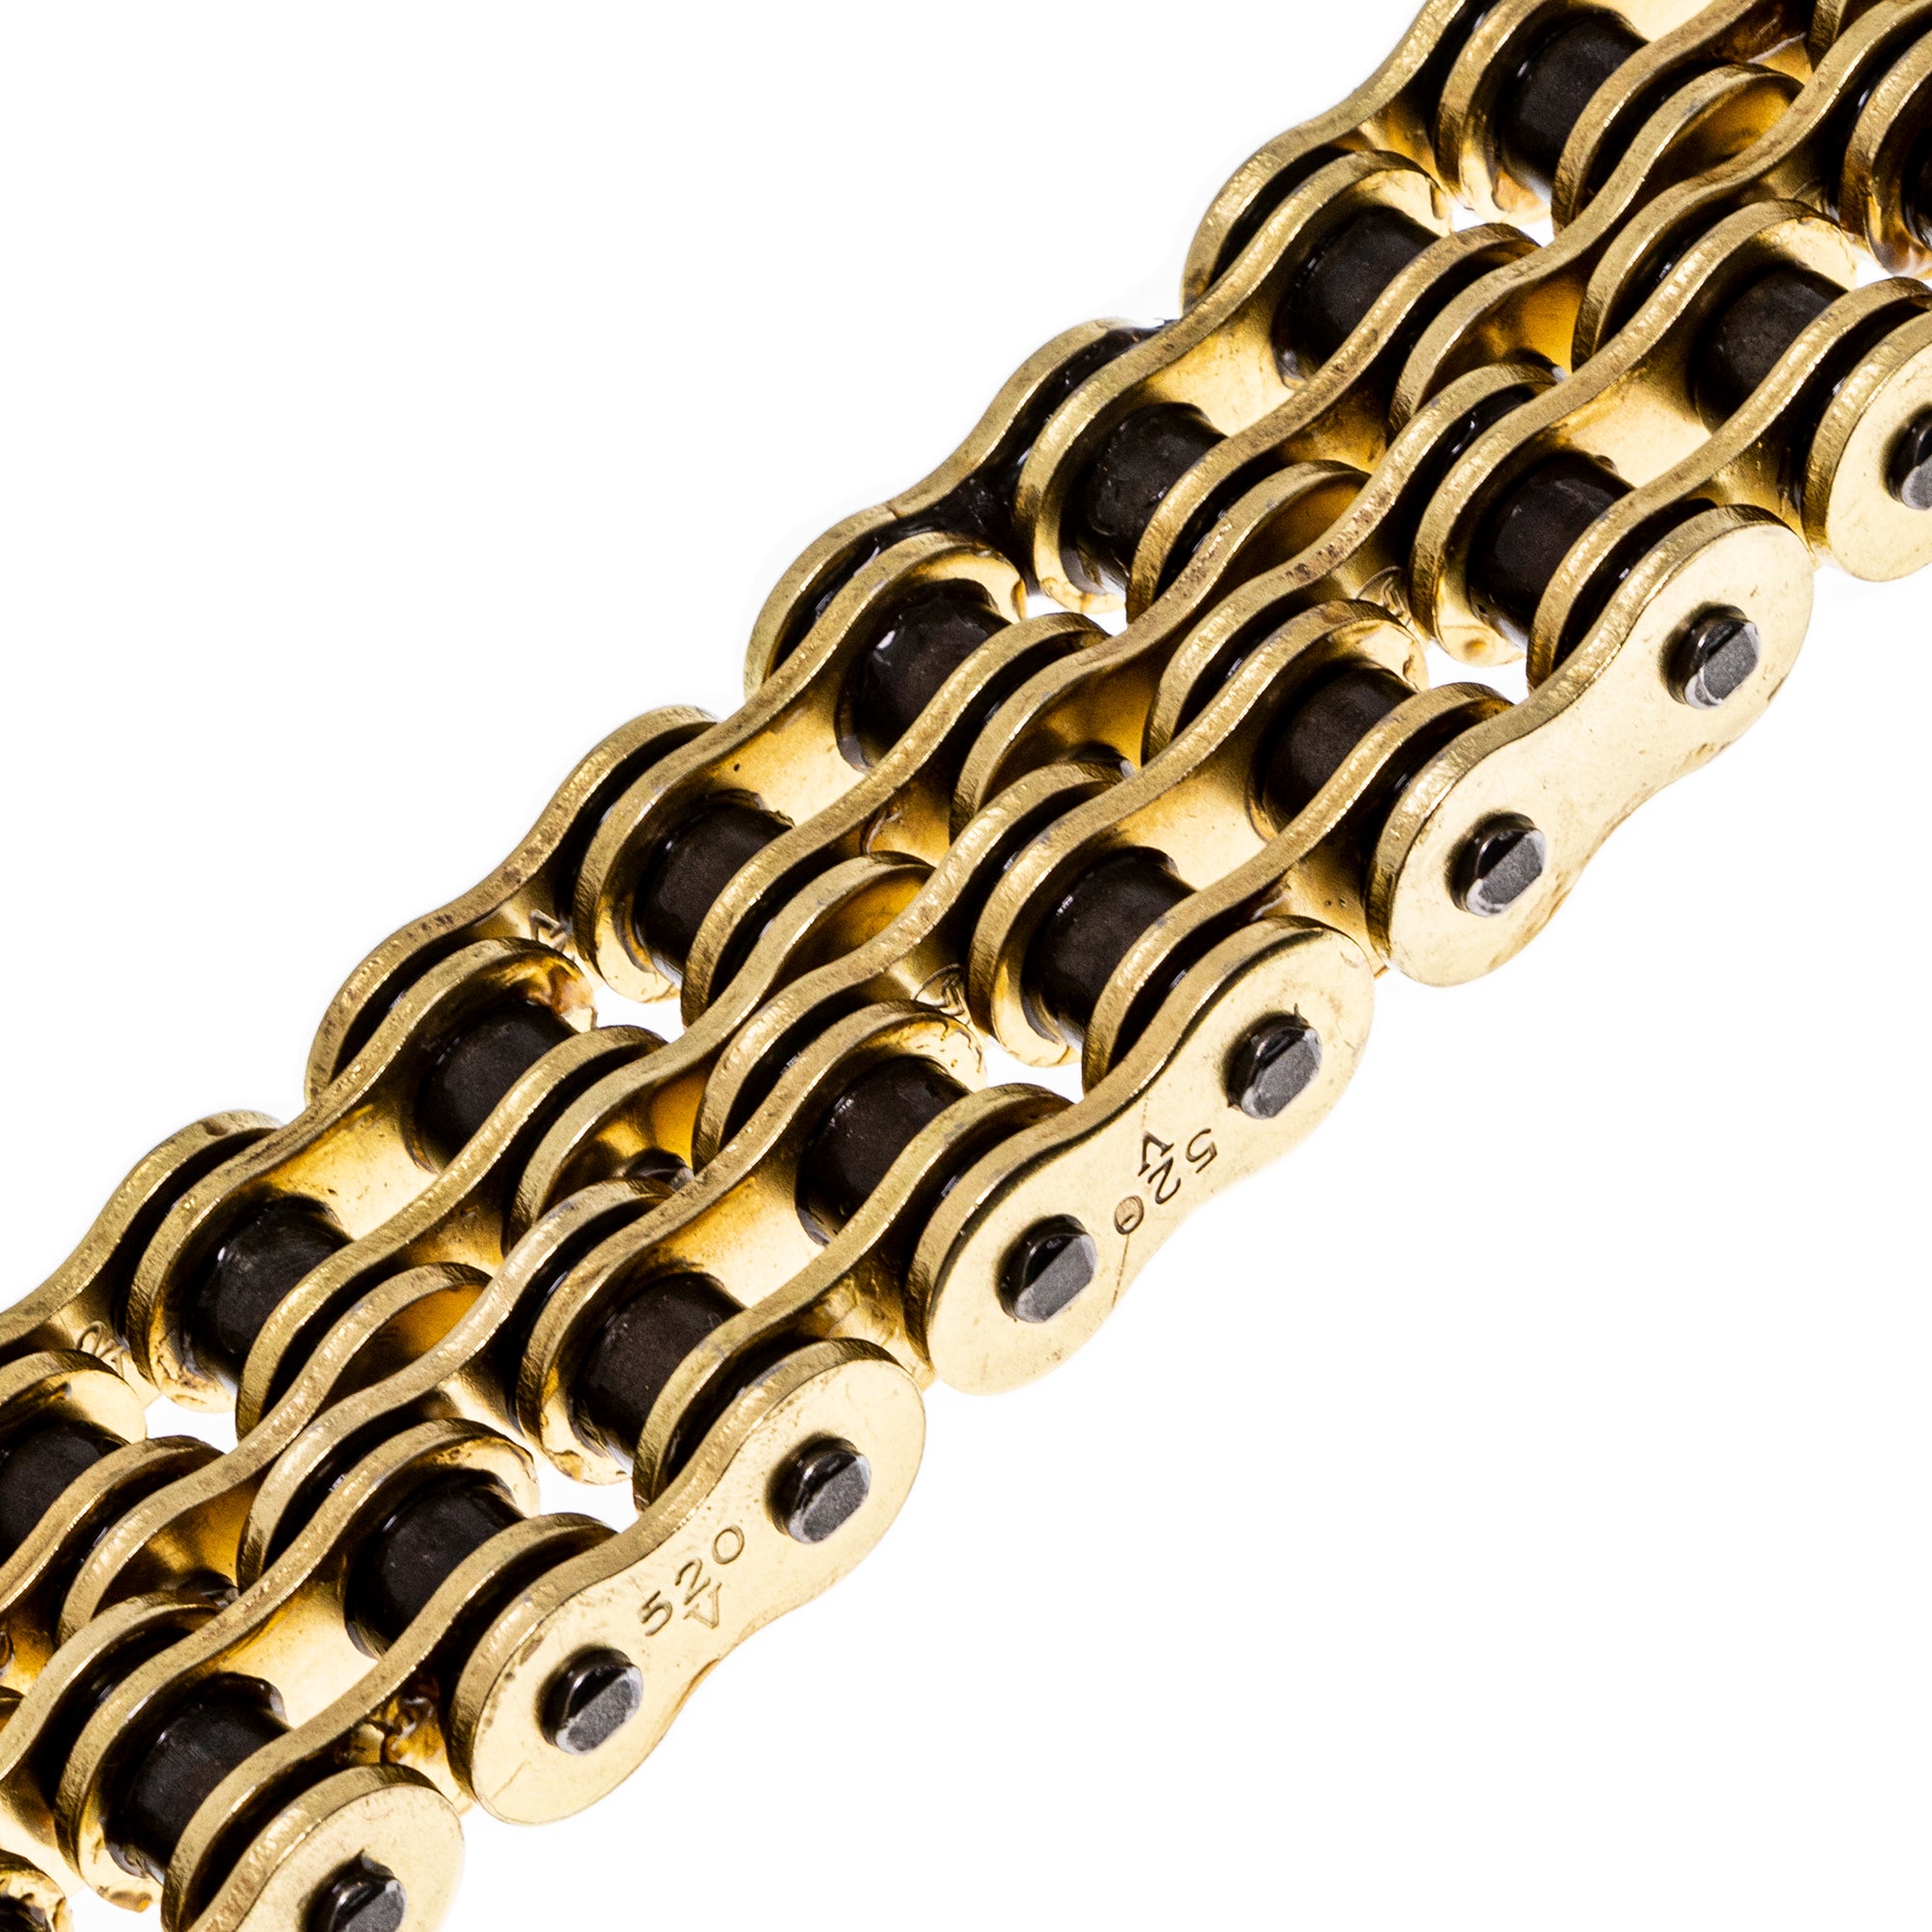 Gold X-Ring Chain 128 w/ Master Link for zOTHER 5517 NICHE 519-CDC2628H